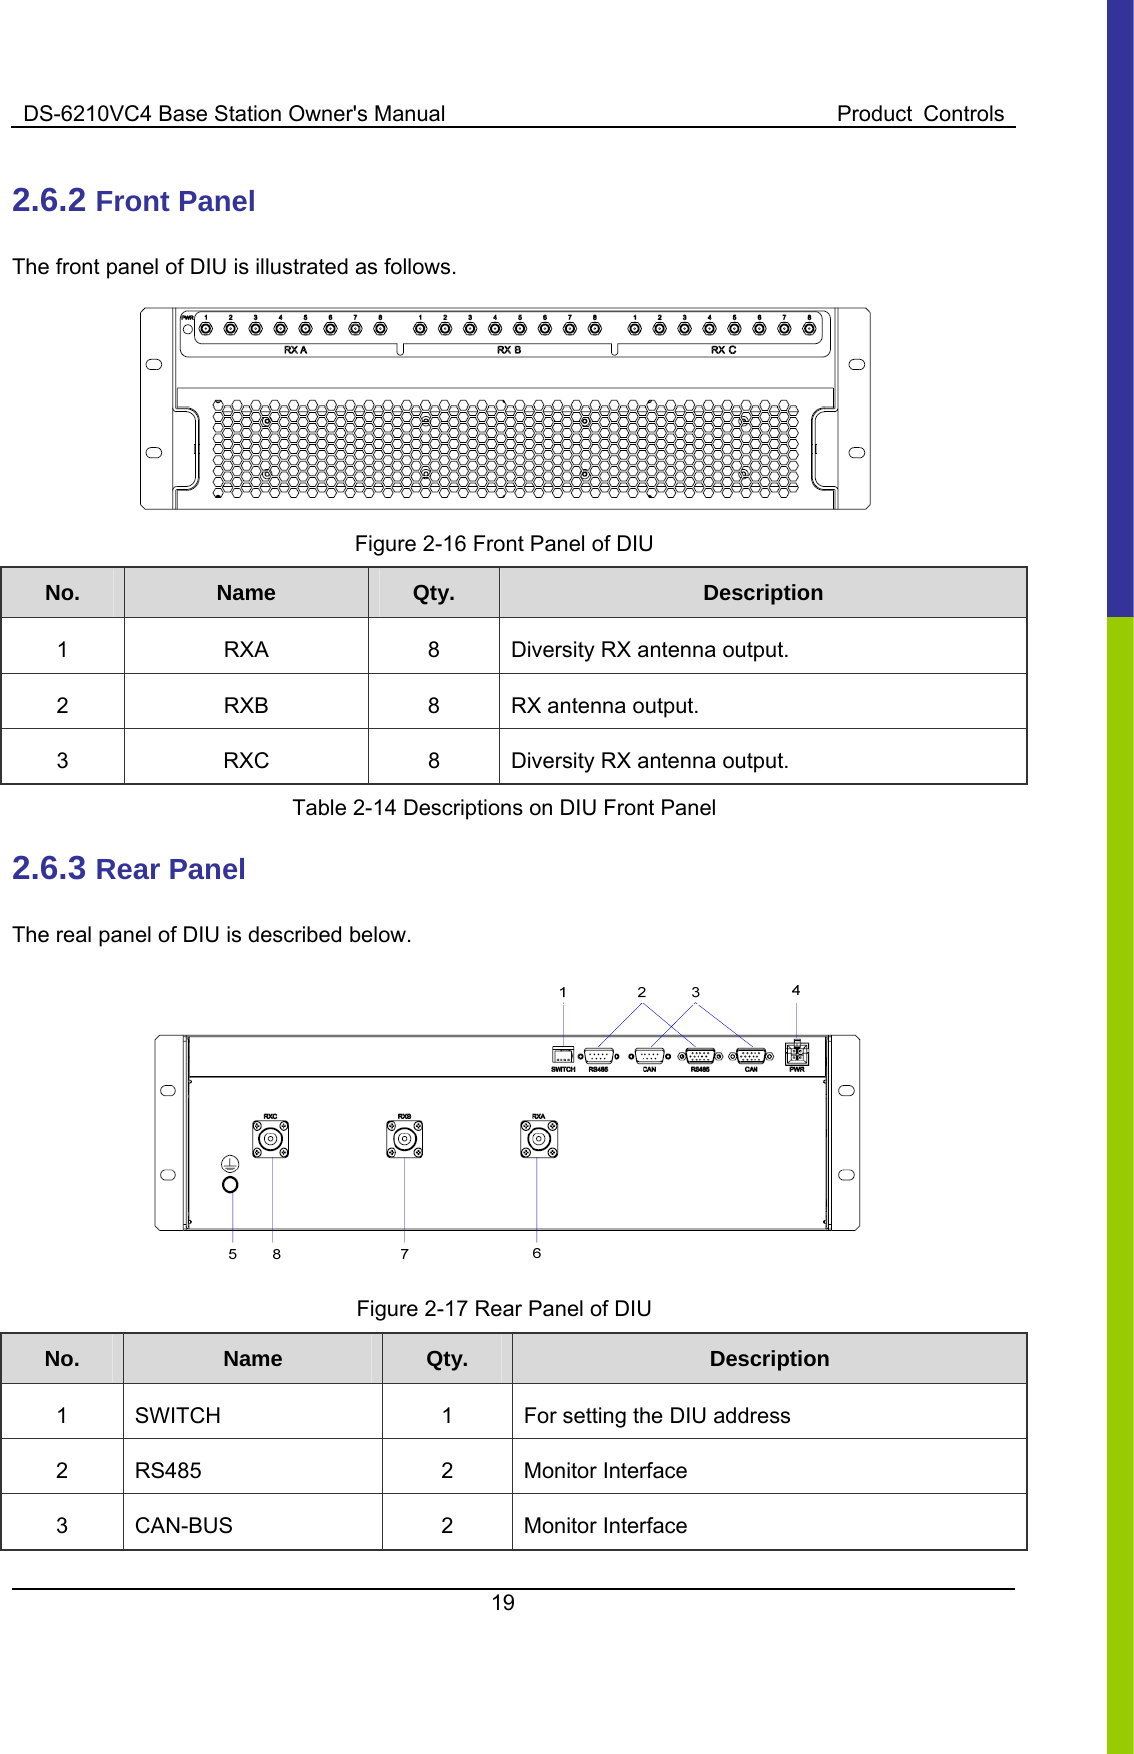 DS-6210VC4 Base Station Owner&apos;s Manual  Product  Controls 19  2.6.2 Front Panel   The front panel of DIU is illustrated as follows.    Figure 2-16 Front Panel of DIU No.  Name   Qty.  Description 1  RXA  8  Diversity RX antenna output. 2 RXB  8 RX antenna output. 3  RXC  8  Diversity RX antenna output. Table 2-14 Descriptions on DIU Front Panel 2.6.3 Rear Panel   The real panel of DIU is described below.      Figure 2-17 Rear Panel of DIU No.  Name   Qty.  Description 1  SWITCH  1  For setting the DIU address 2 RS485  2  Monitor Interface  3 CAN-BUS  2  Monitor Interface  